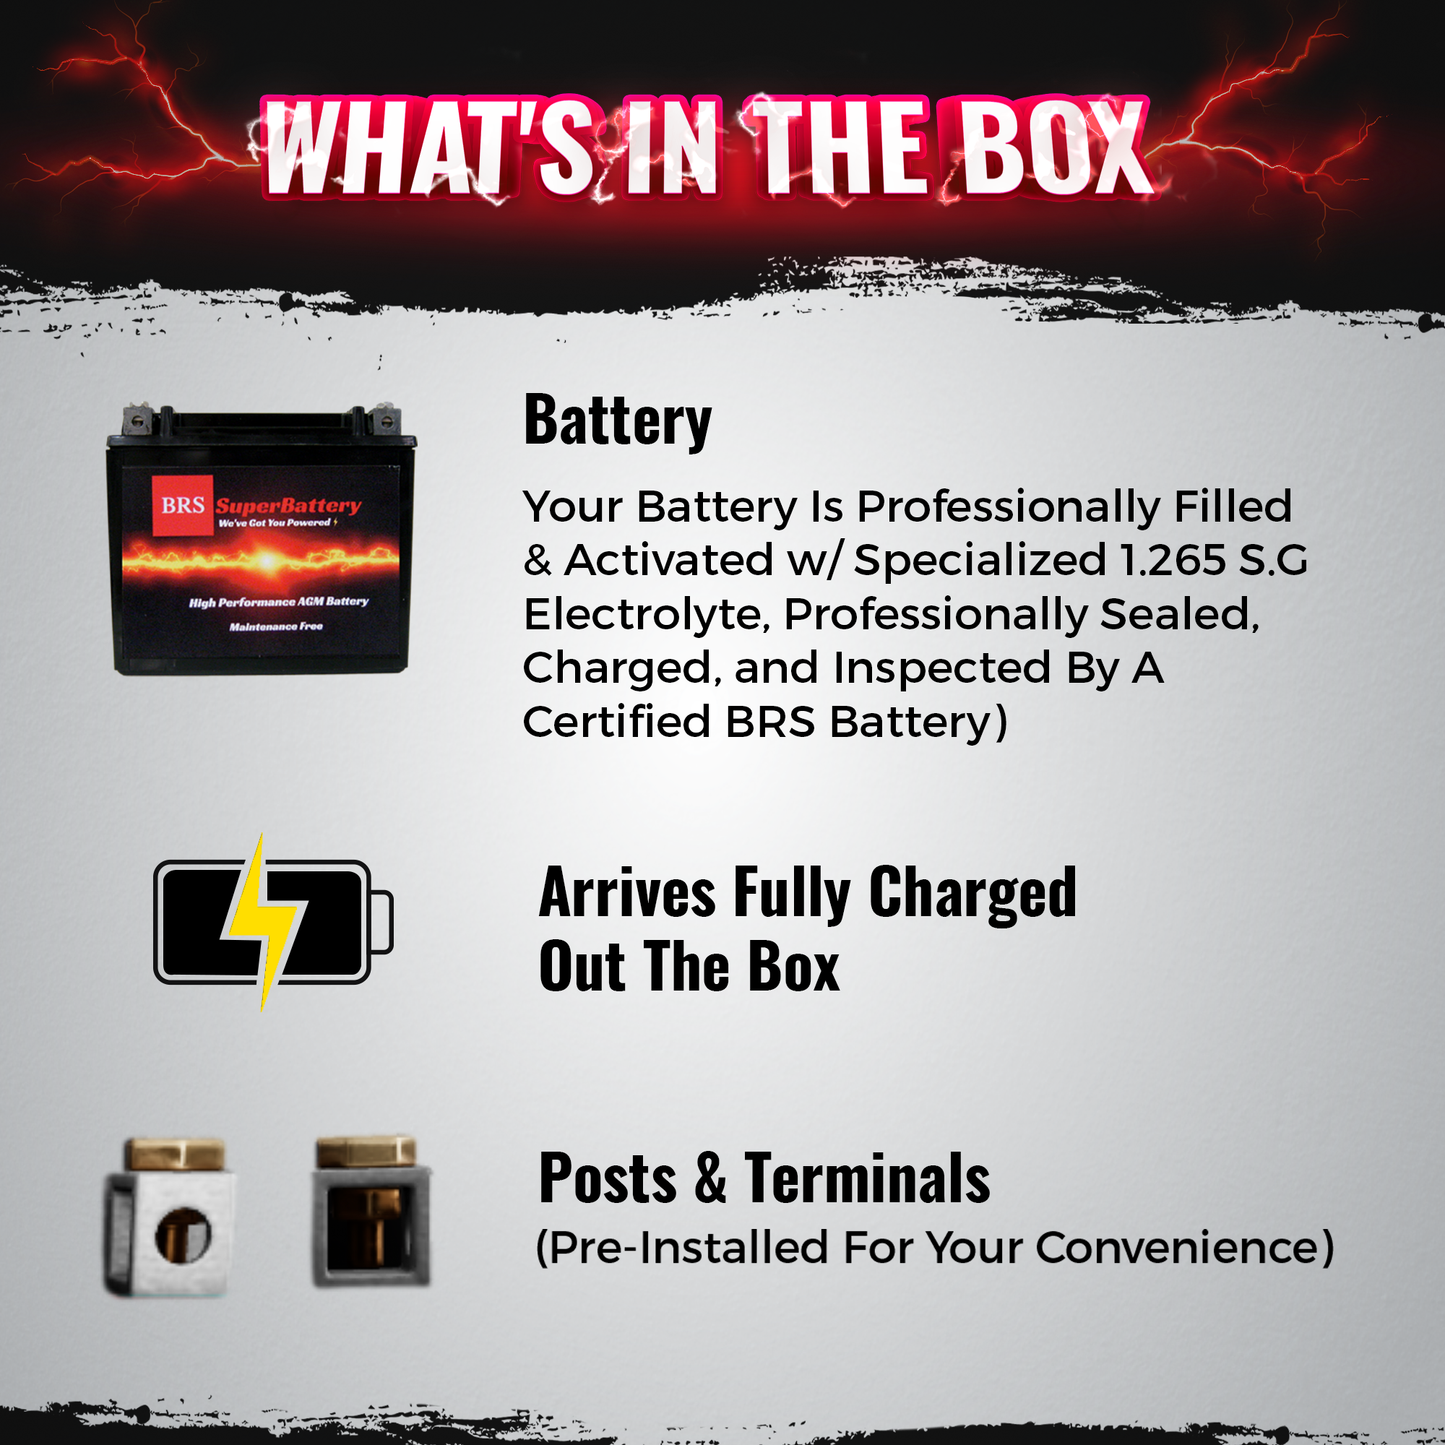 BRS14AH-BS 12v High Performance Sealed AGM PowerSport 2 Year Battery - BRS Super Battery